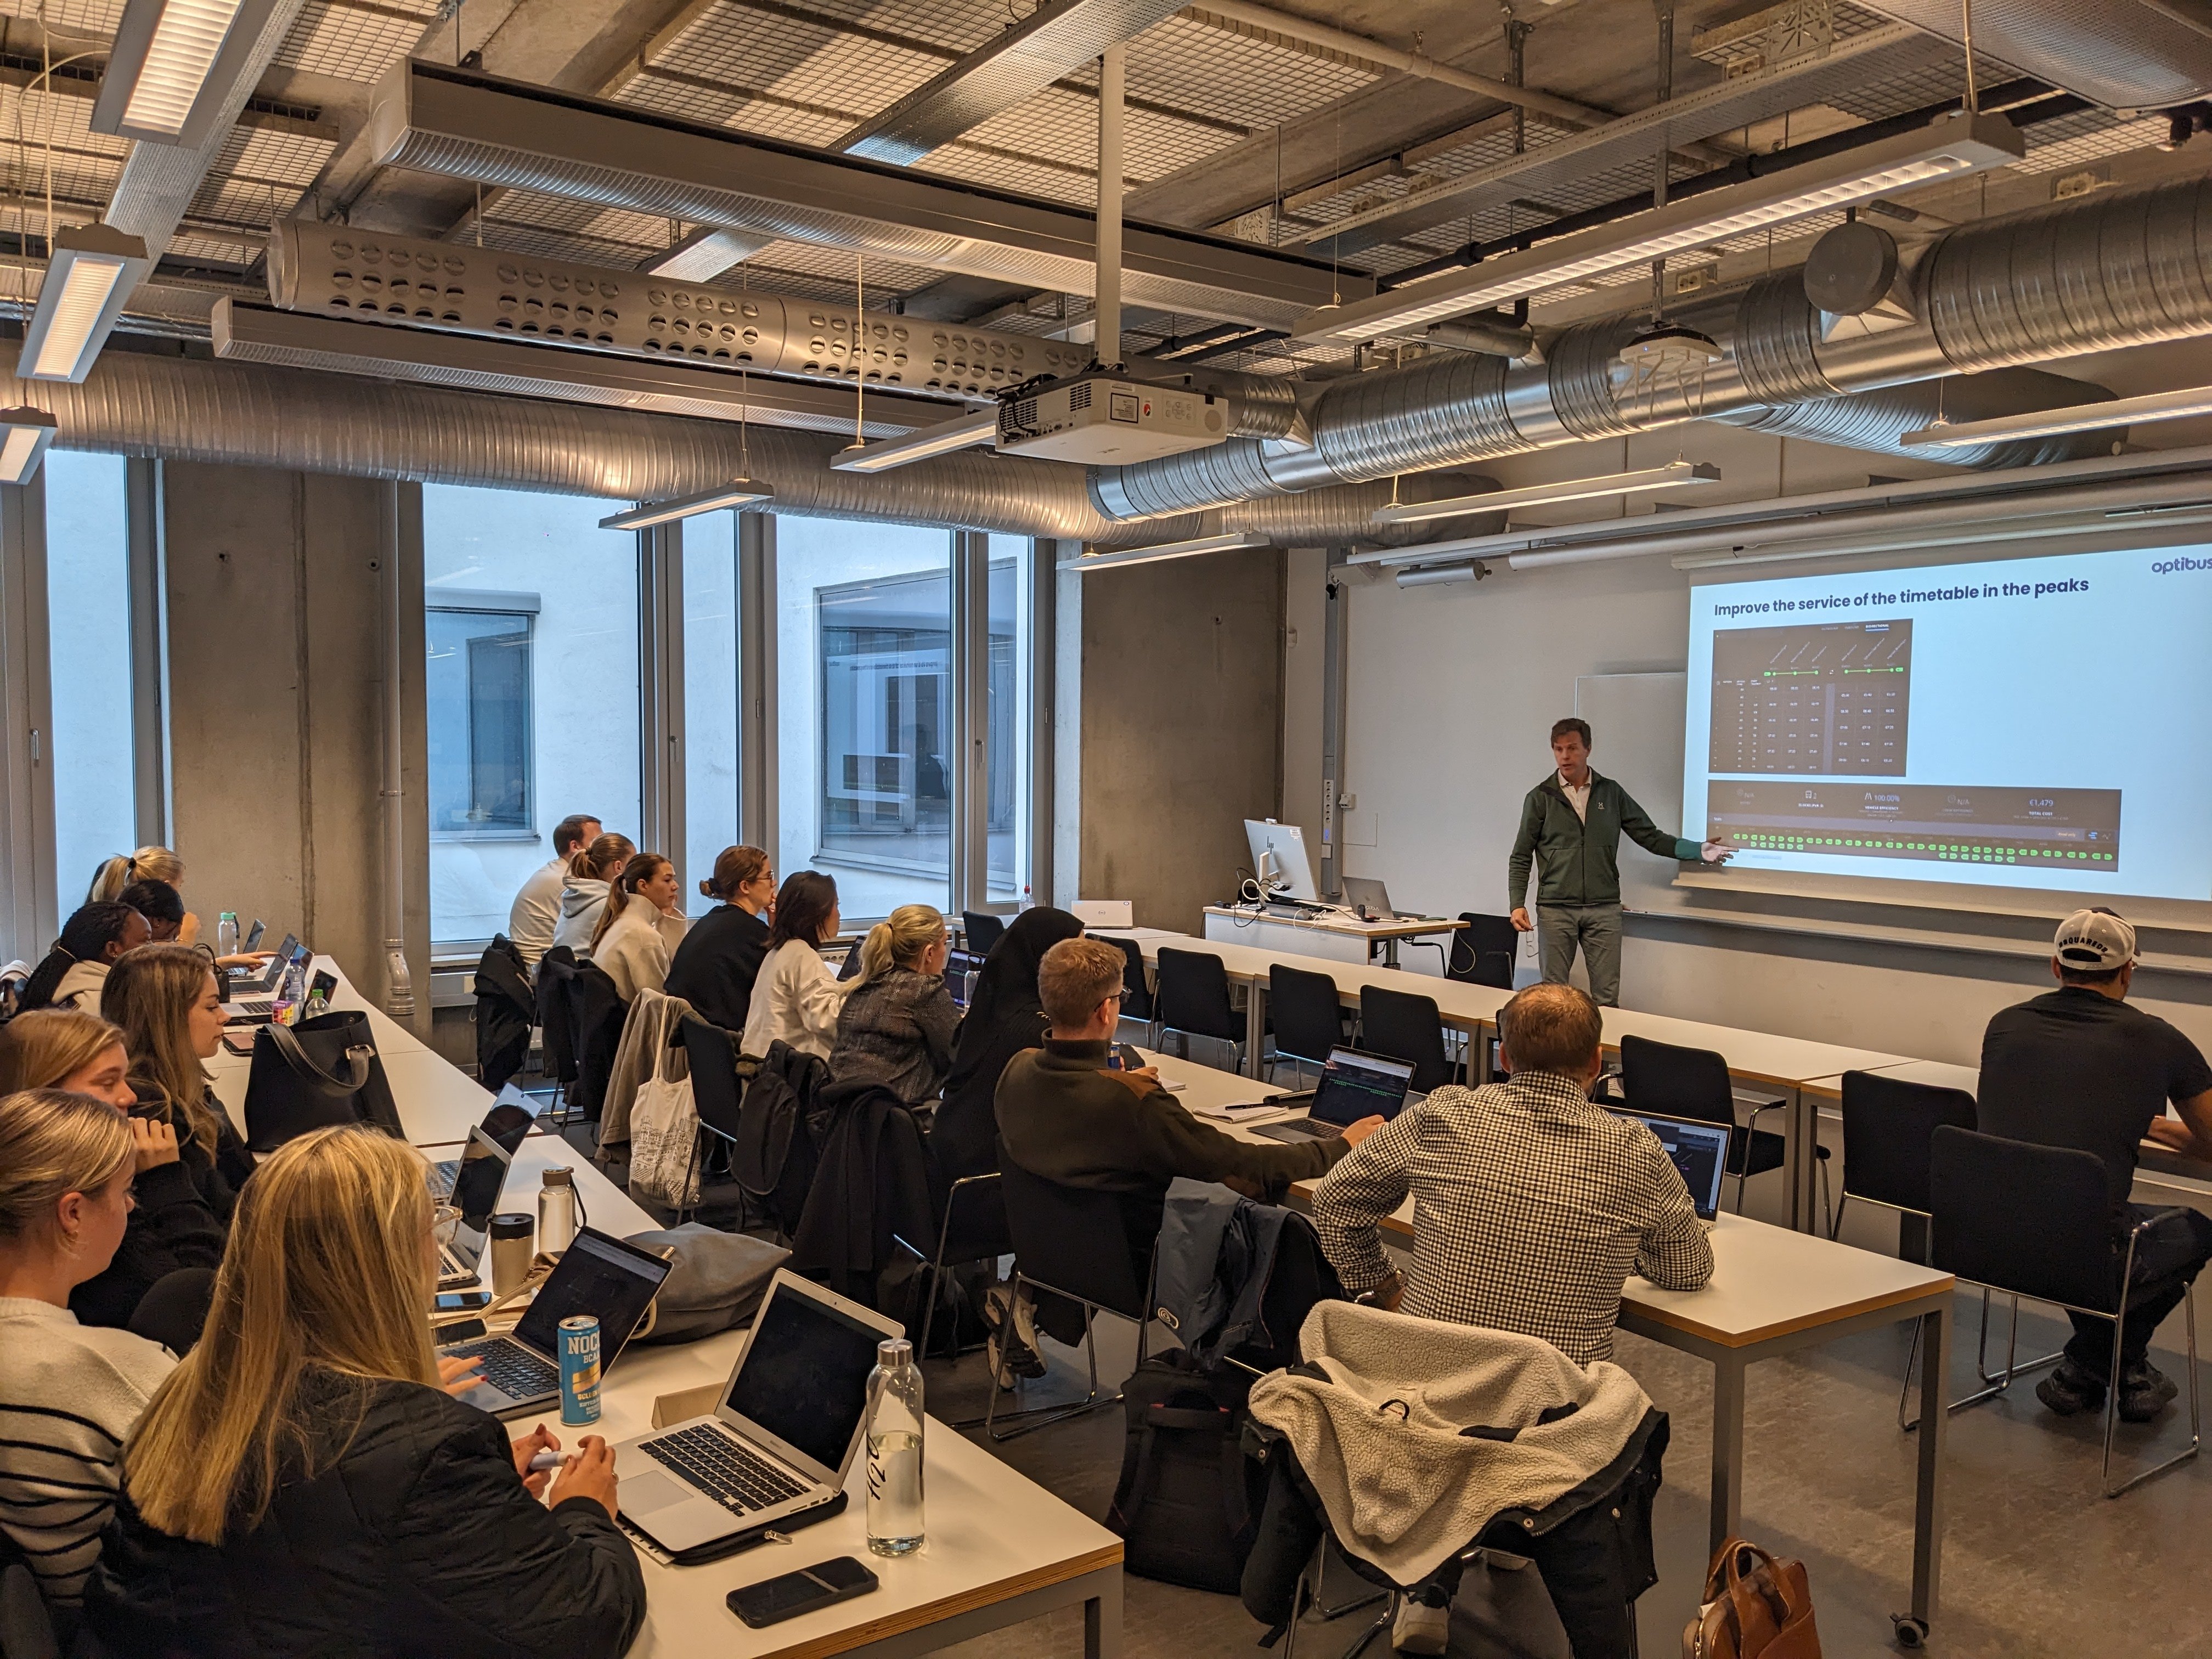 Students of the “Business Information Systems for Transport and Logistics” course led by Ola Johansson, senior lecturer at the Malmö University Department of Urban Studies, receive hands-on training in tim